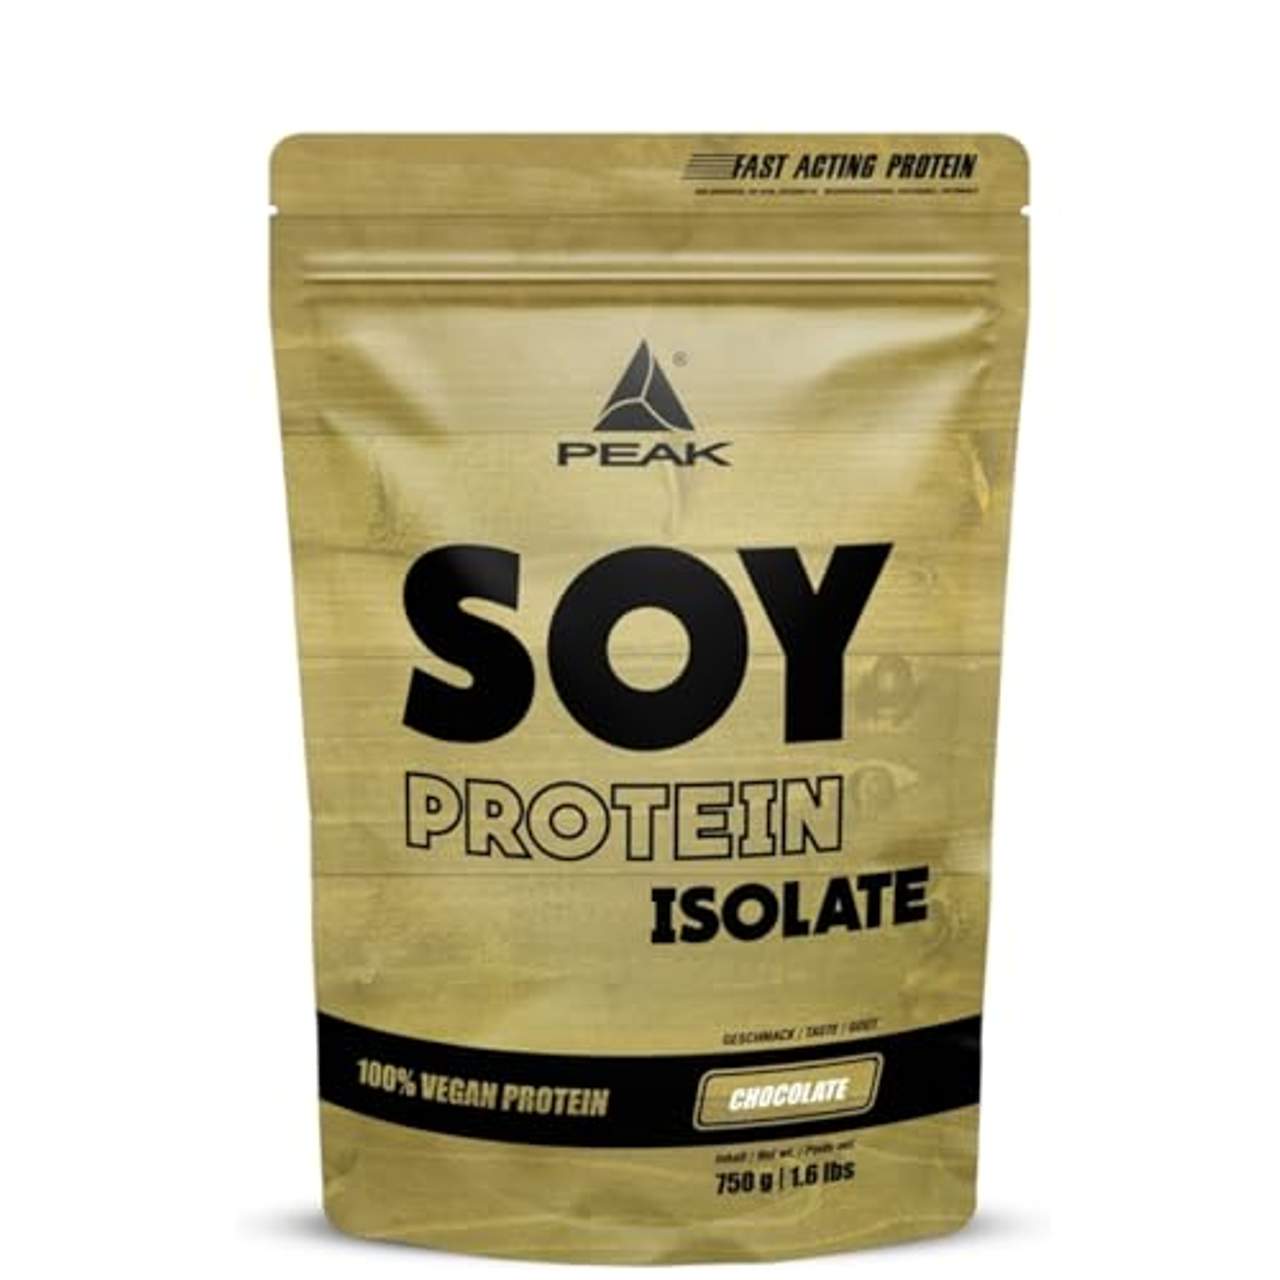 PEAK Soy Protein Isolate Chocolate 750g